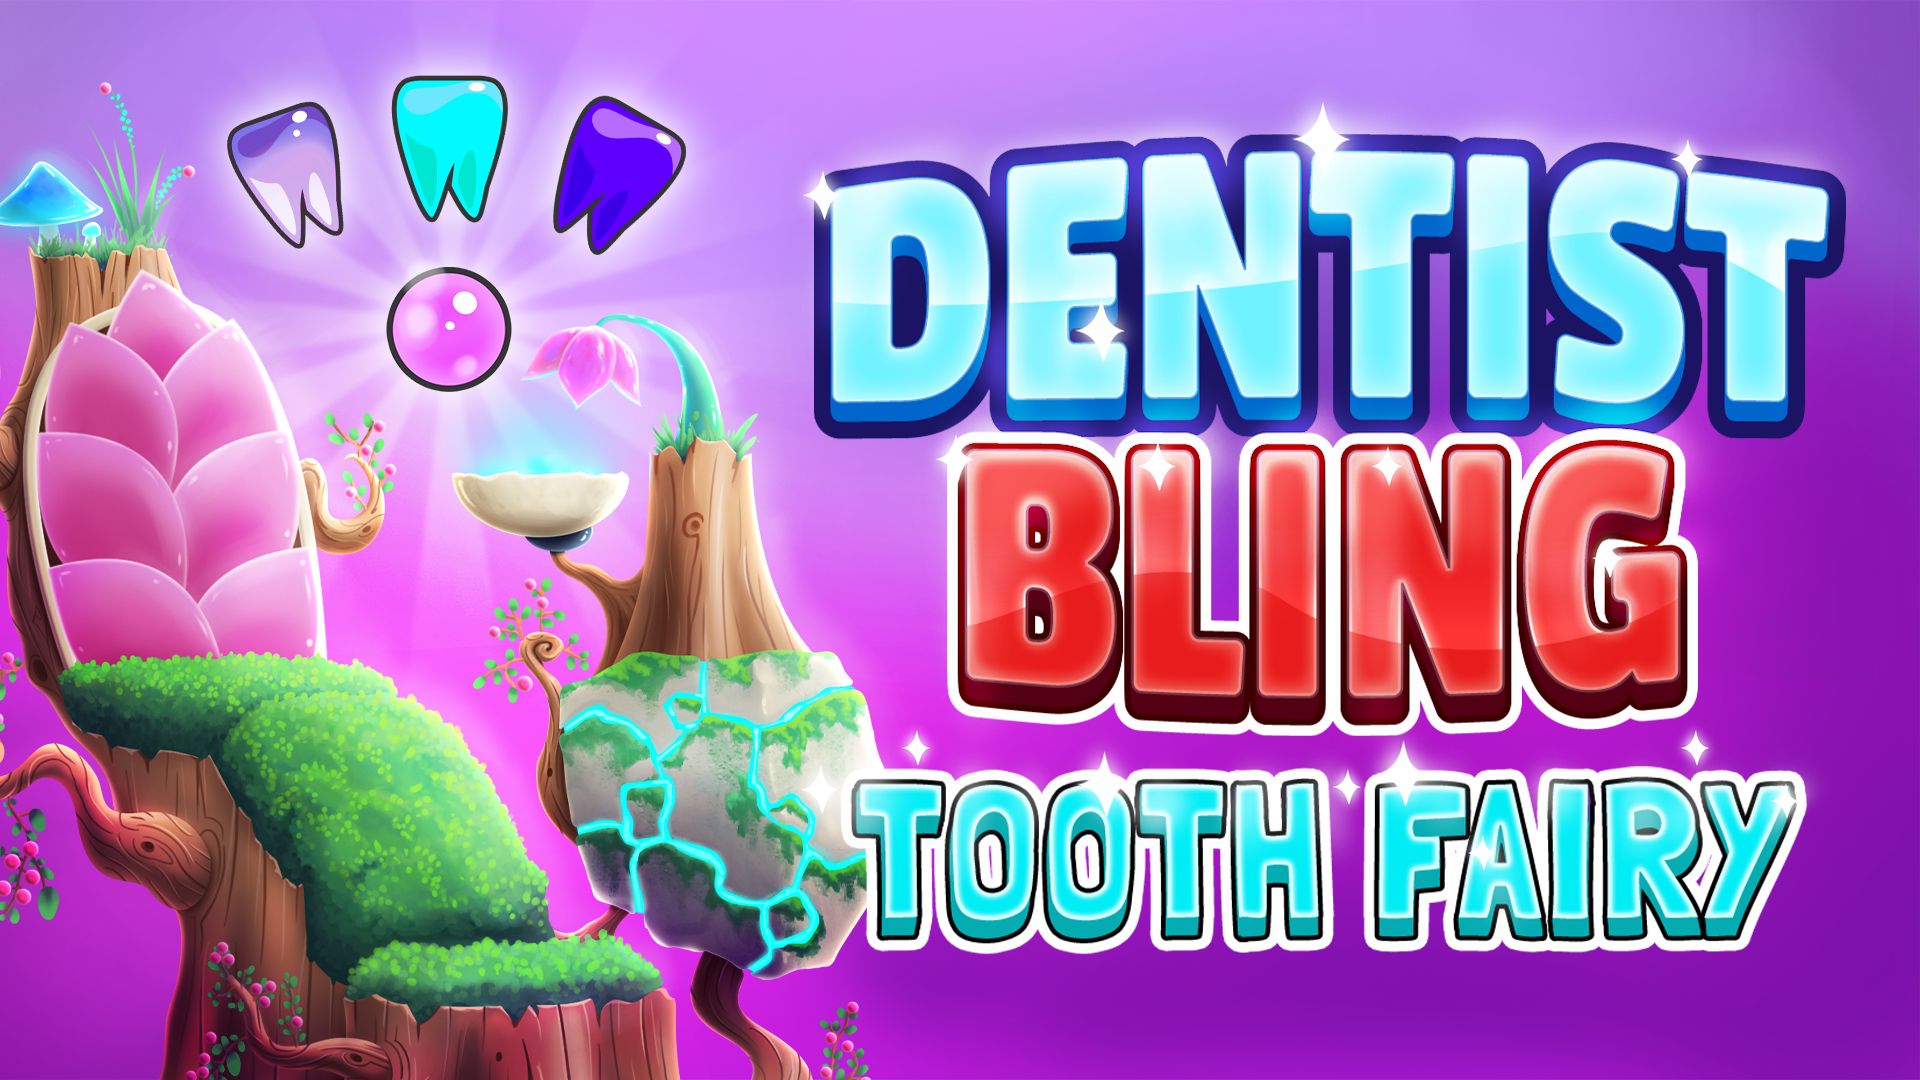 Dentist Bling: Tooth Fairy